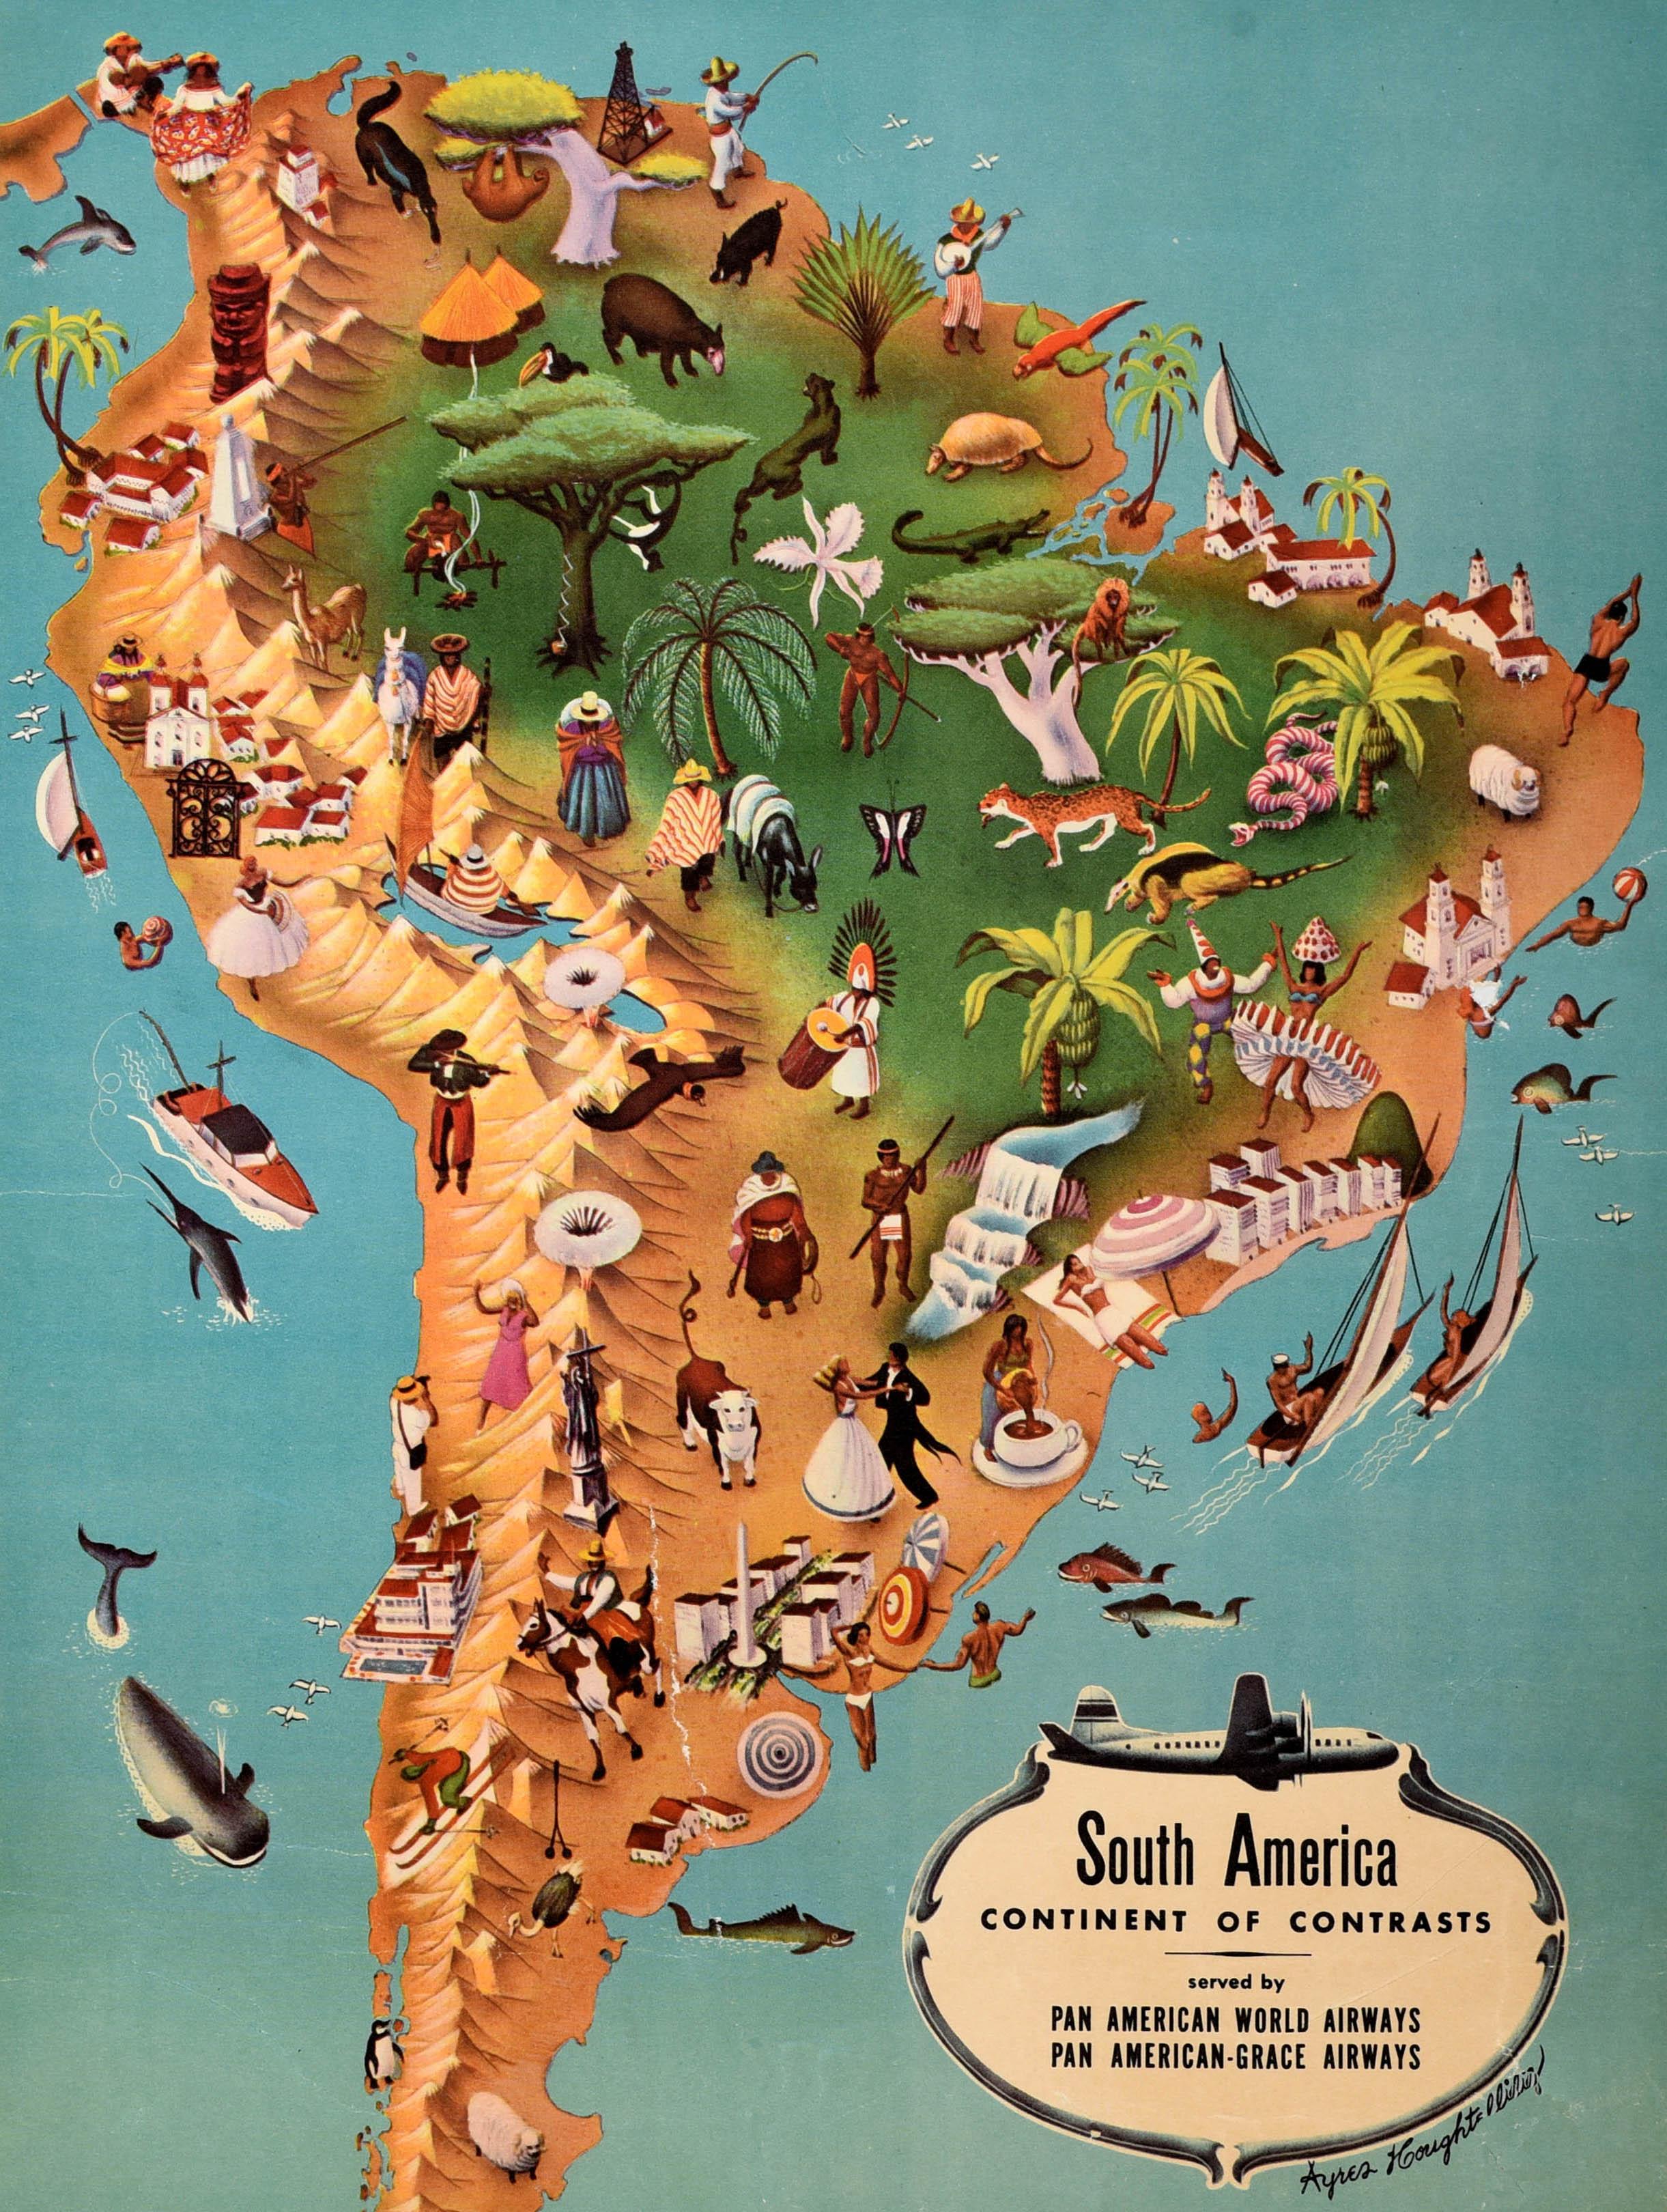 Original vintage Pan Am travel advertising map poster - South America Continent of Contrasts served by Pan American World Airways and Pan American Grace Airways - featuring a pictorial map by Ayres Houghtelling (1912 - 2006) with illustrations of